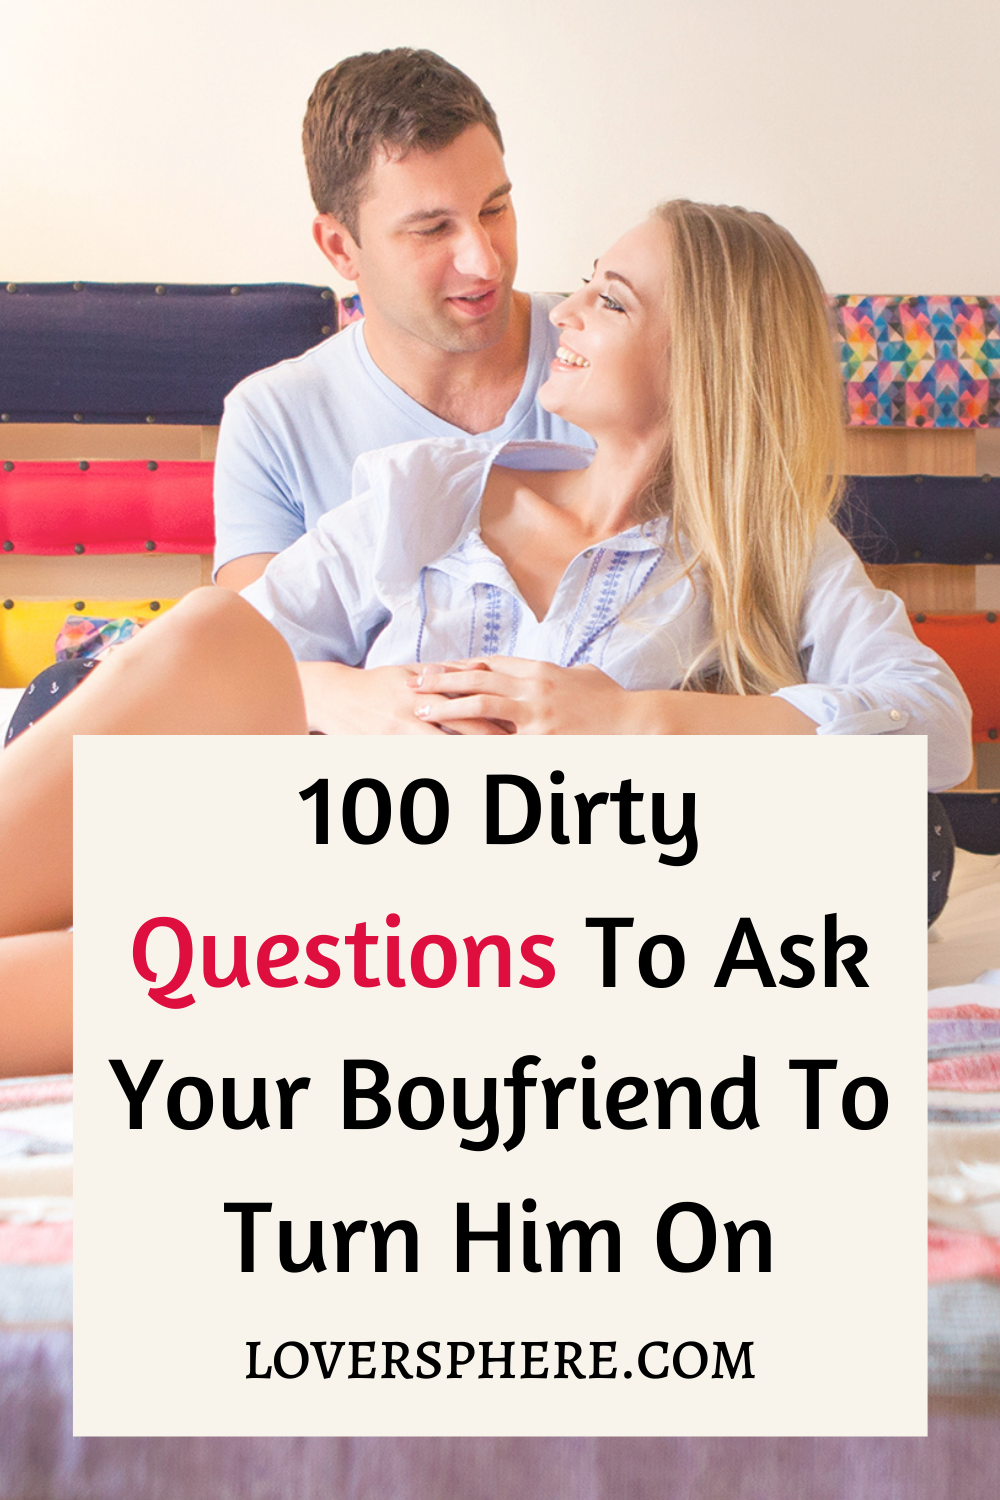 100 Dirty Questions To Ask Your Boyfriend To Turn Him On - Lover Sphere